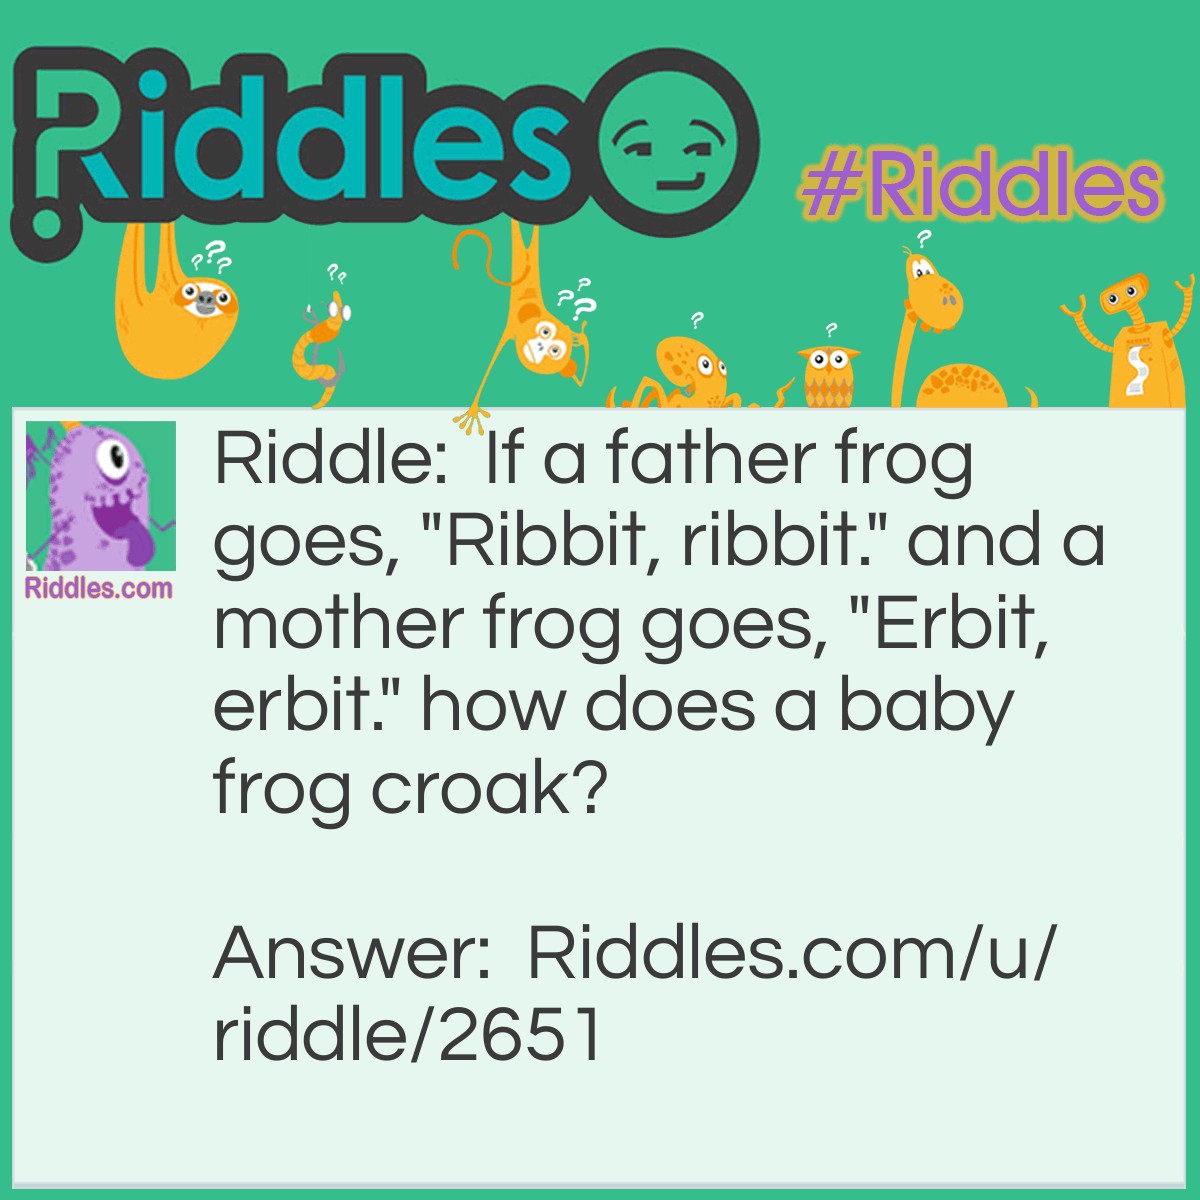 Riddle: If a father frog goes, "Ribbit, ribbit." and a mother frog goes, "Erbit, erbit." how does a baby frog croak? Answer: It doesn't. A baby frog is a tadpole.